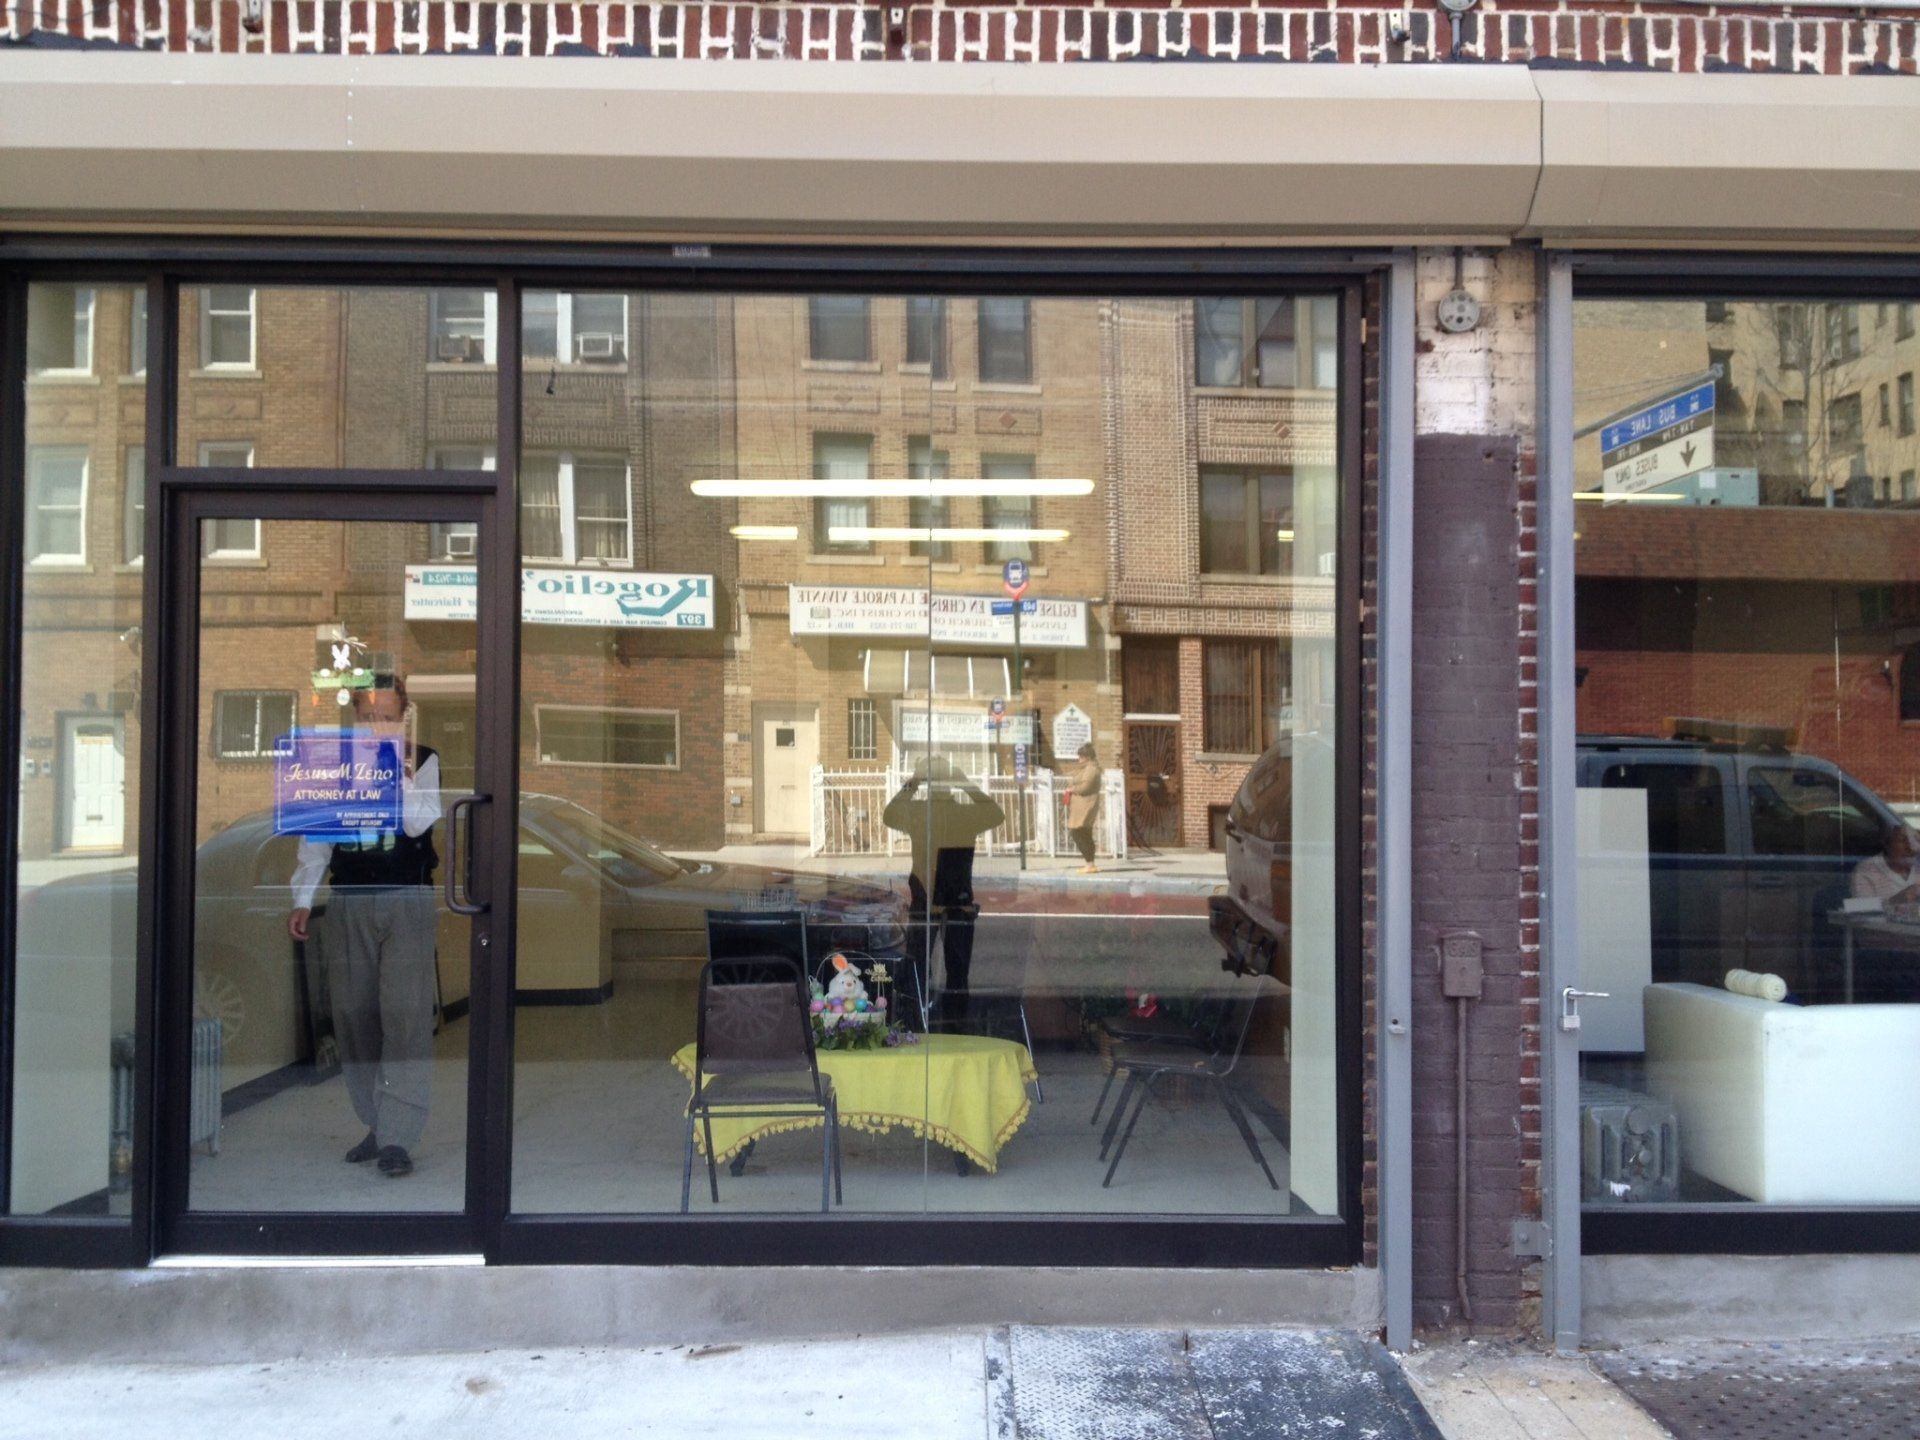 Commercial Glass & Storefront | Brooklyn, NY | Absolute Glass & Mirrors